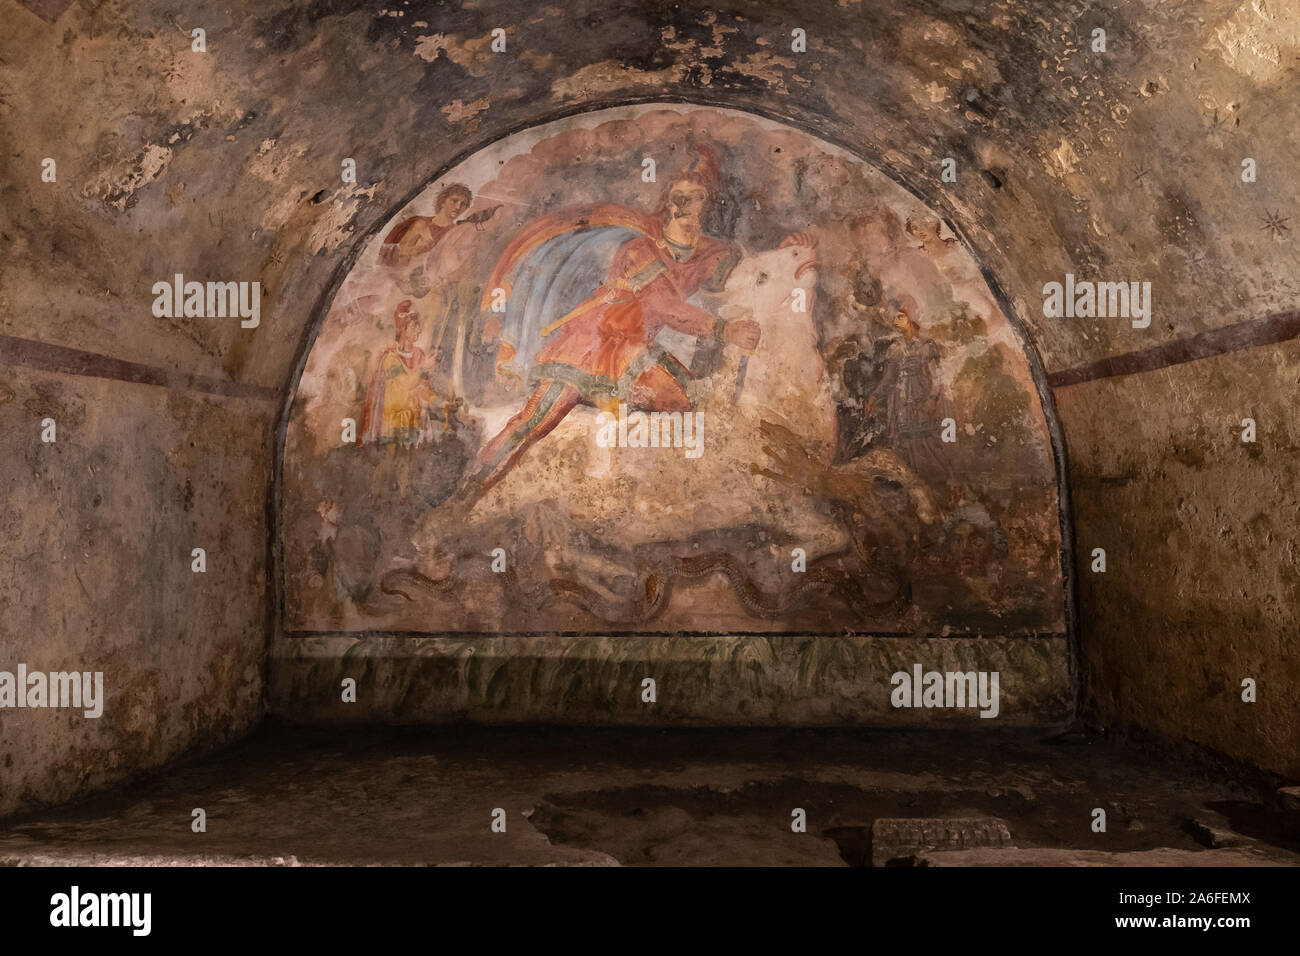 Capua, Caserta, Italy, October 2019: Fresco Representing the Mithras divinity was killing a white bull, inside of the Mithraeum of Ancient Capua. Is one of the most important of the Roman empire.  Stock Photo